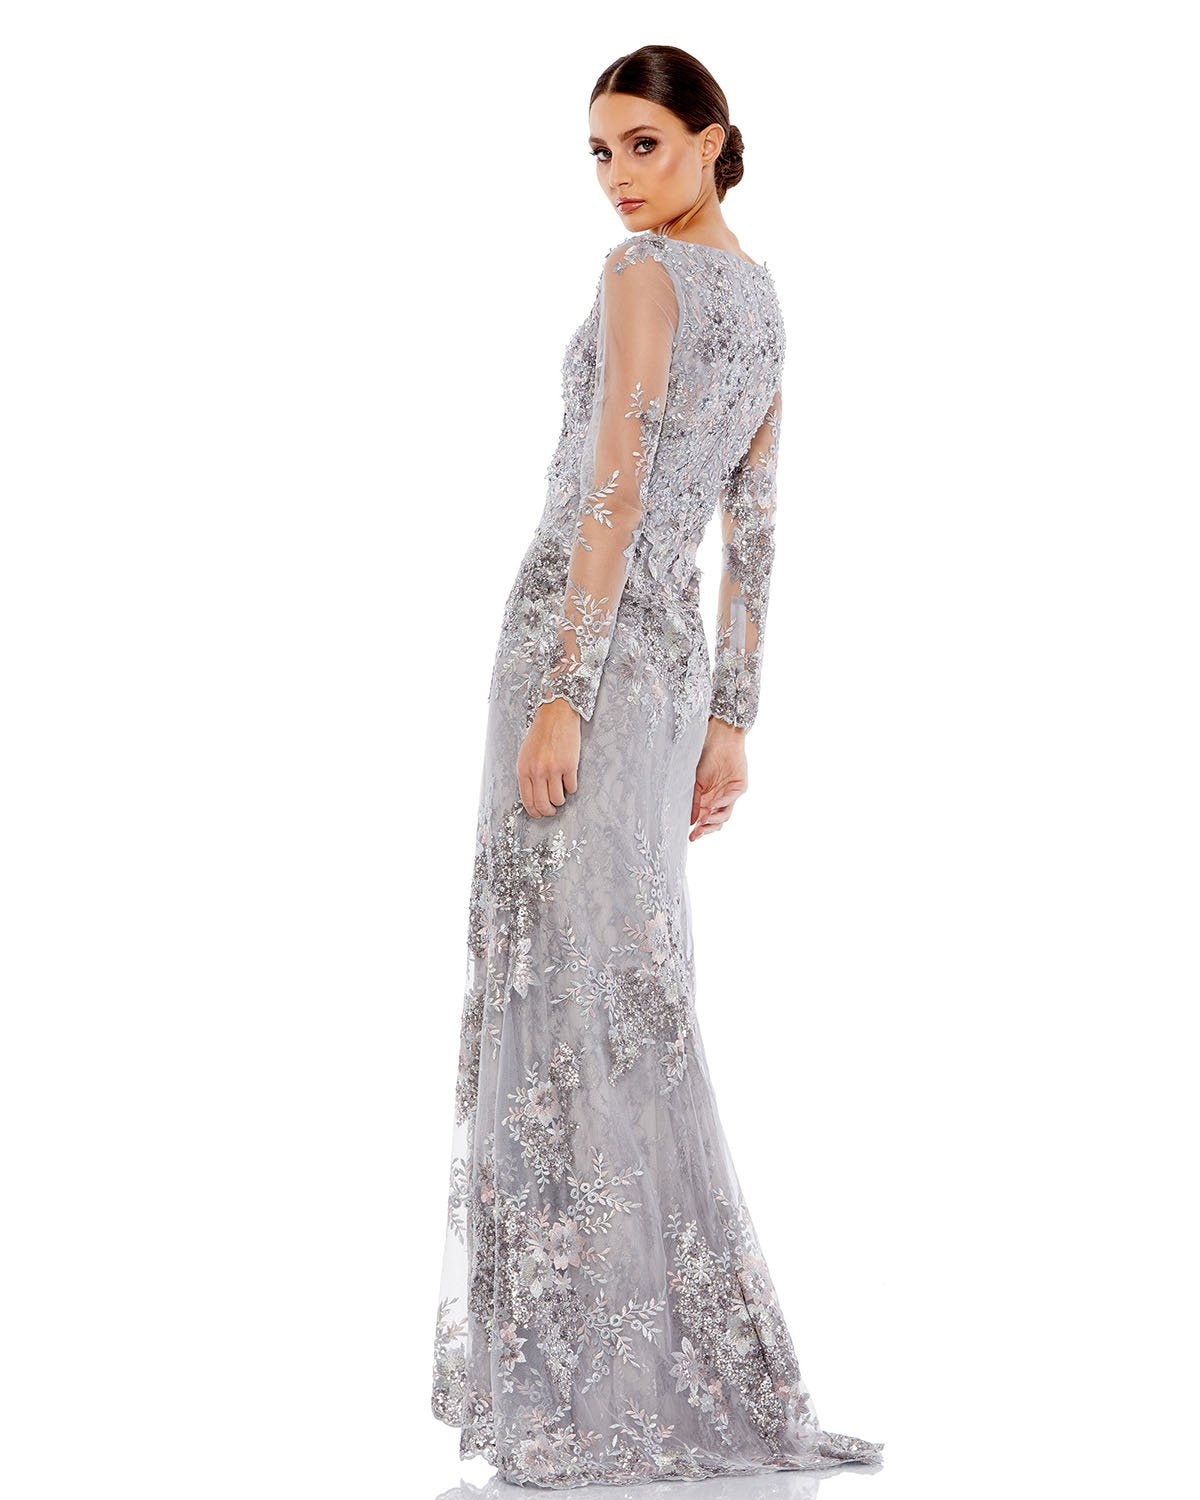 Elegant floor-length evening gown featuring illusion sleeves and plunging v-neckline. Gown adorned with floral embroidery and dainty beaded embellishments. Mac Duggal Back Zipper 100% Polyester Long Sleeve Full Length V-Neck Style #67539